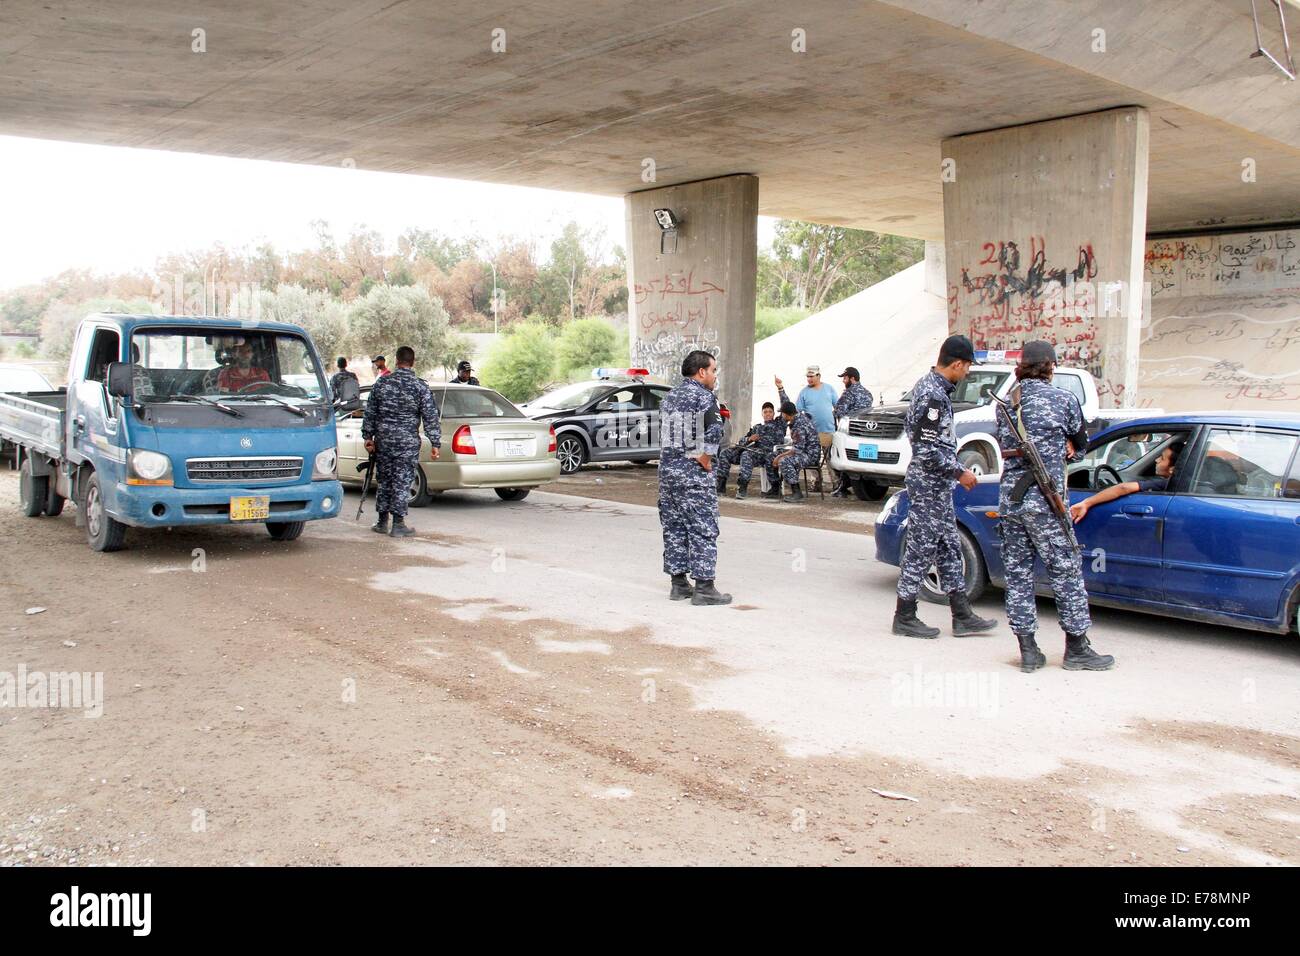 (140909) -- TRIPOLI, Sept. 9 (Xinhua) -- Policemen inspect cars under a damaged bridge in Tripoli, Libya, on Sept. 9, 2014. A number of checkpoints were set up on some key roads in Tripoli by local policemen to maintain the security in the capital city. Since July, Tripoli has been seeing bloody clashes between armed Islamist groups and pro-secular militias. (Xinhua/Hamza Turkia) Stock Photo